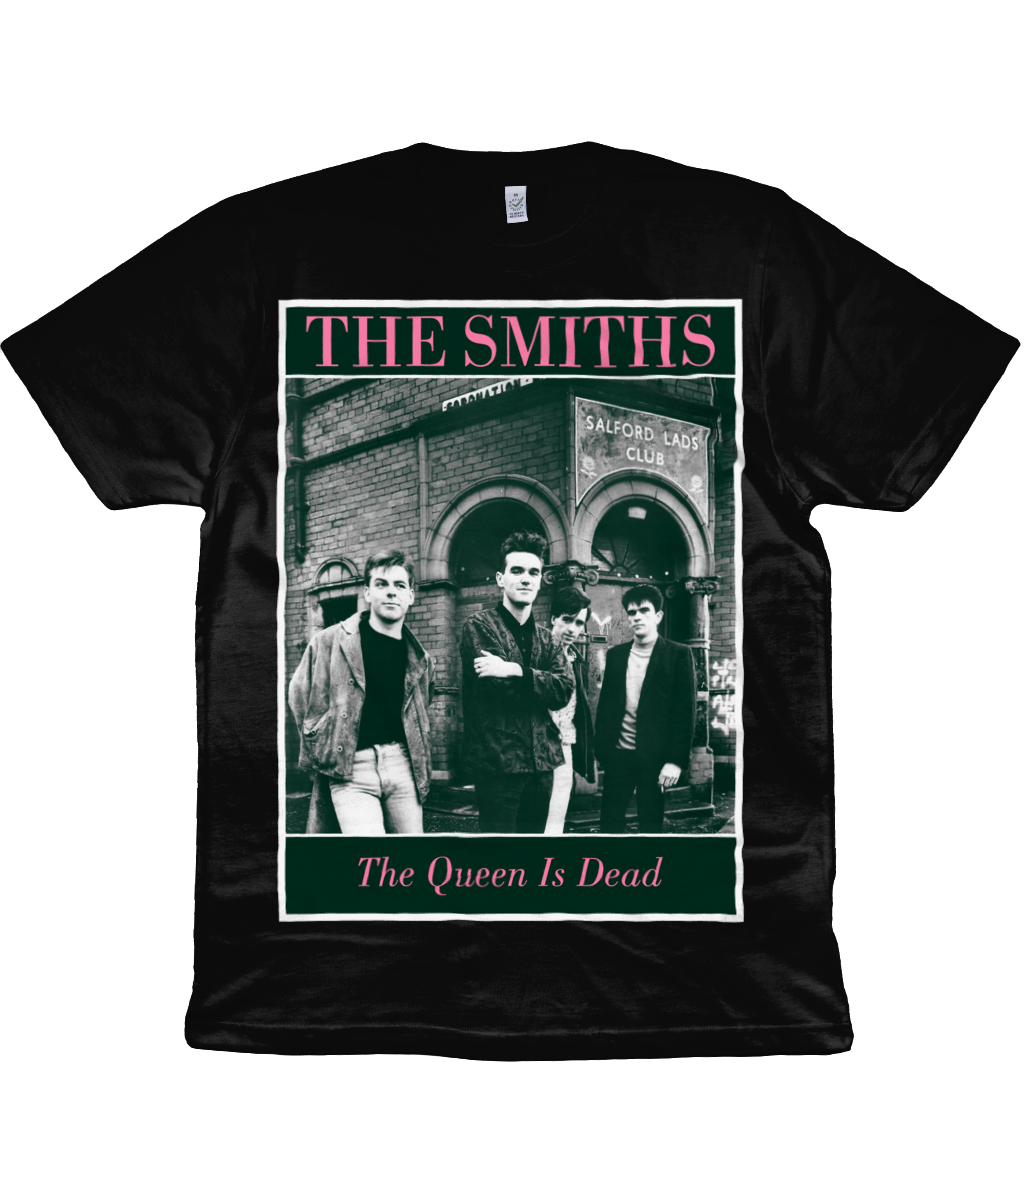 THE SMITHS -The Queen Is Dead - 1986 - Salford Lads Club